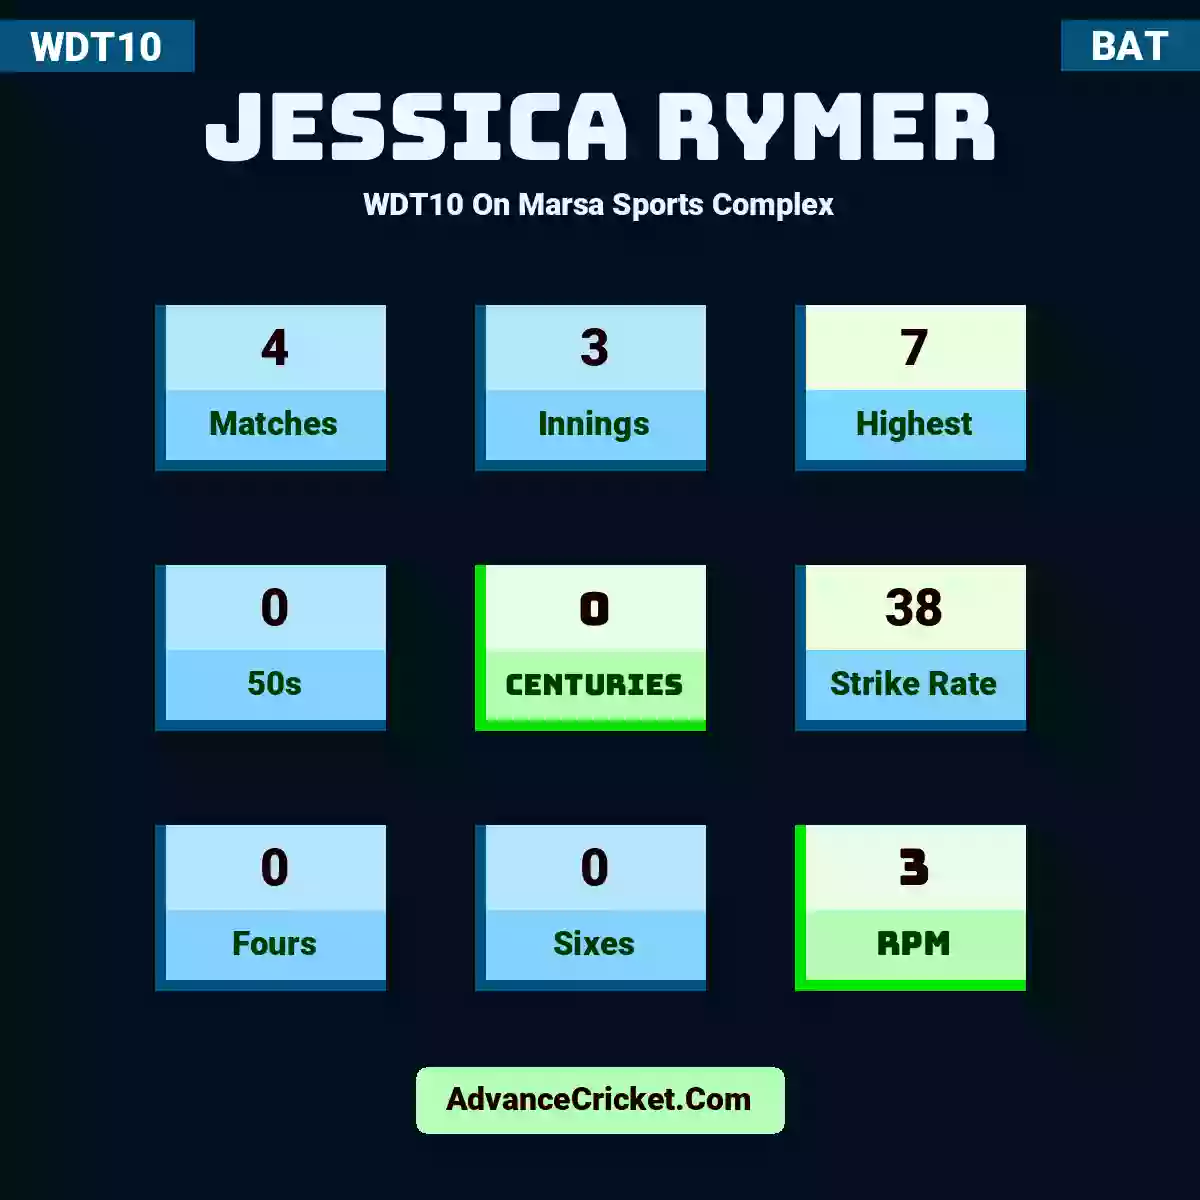 Jessica Rymer WDT10  On Marsa Sports Complex, Jessica Rymer played 4 matches, scored 7 runs as highest, 0 half-centuries, and 0 centuries, with a strike rate of 38. J.Rymer hit 0 fours and 0 sixes, with an RPM of 3.